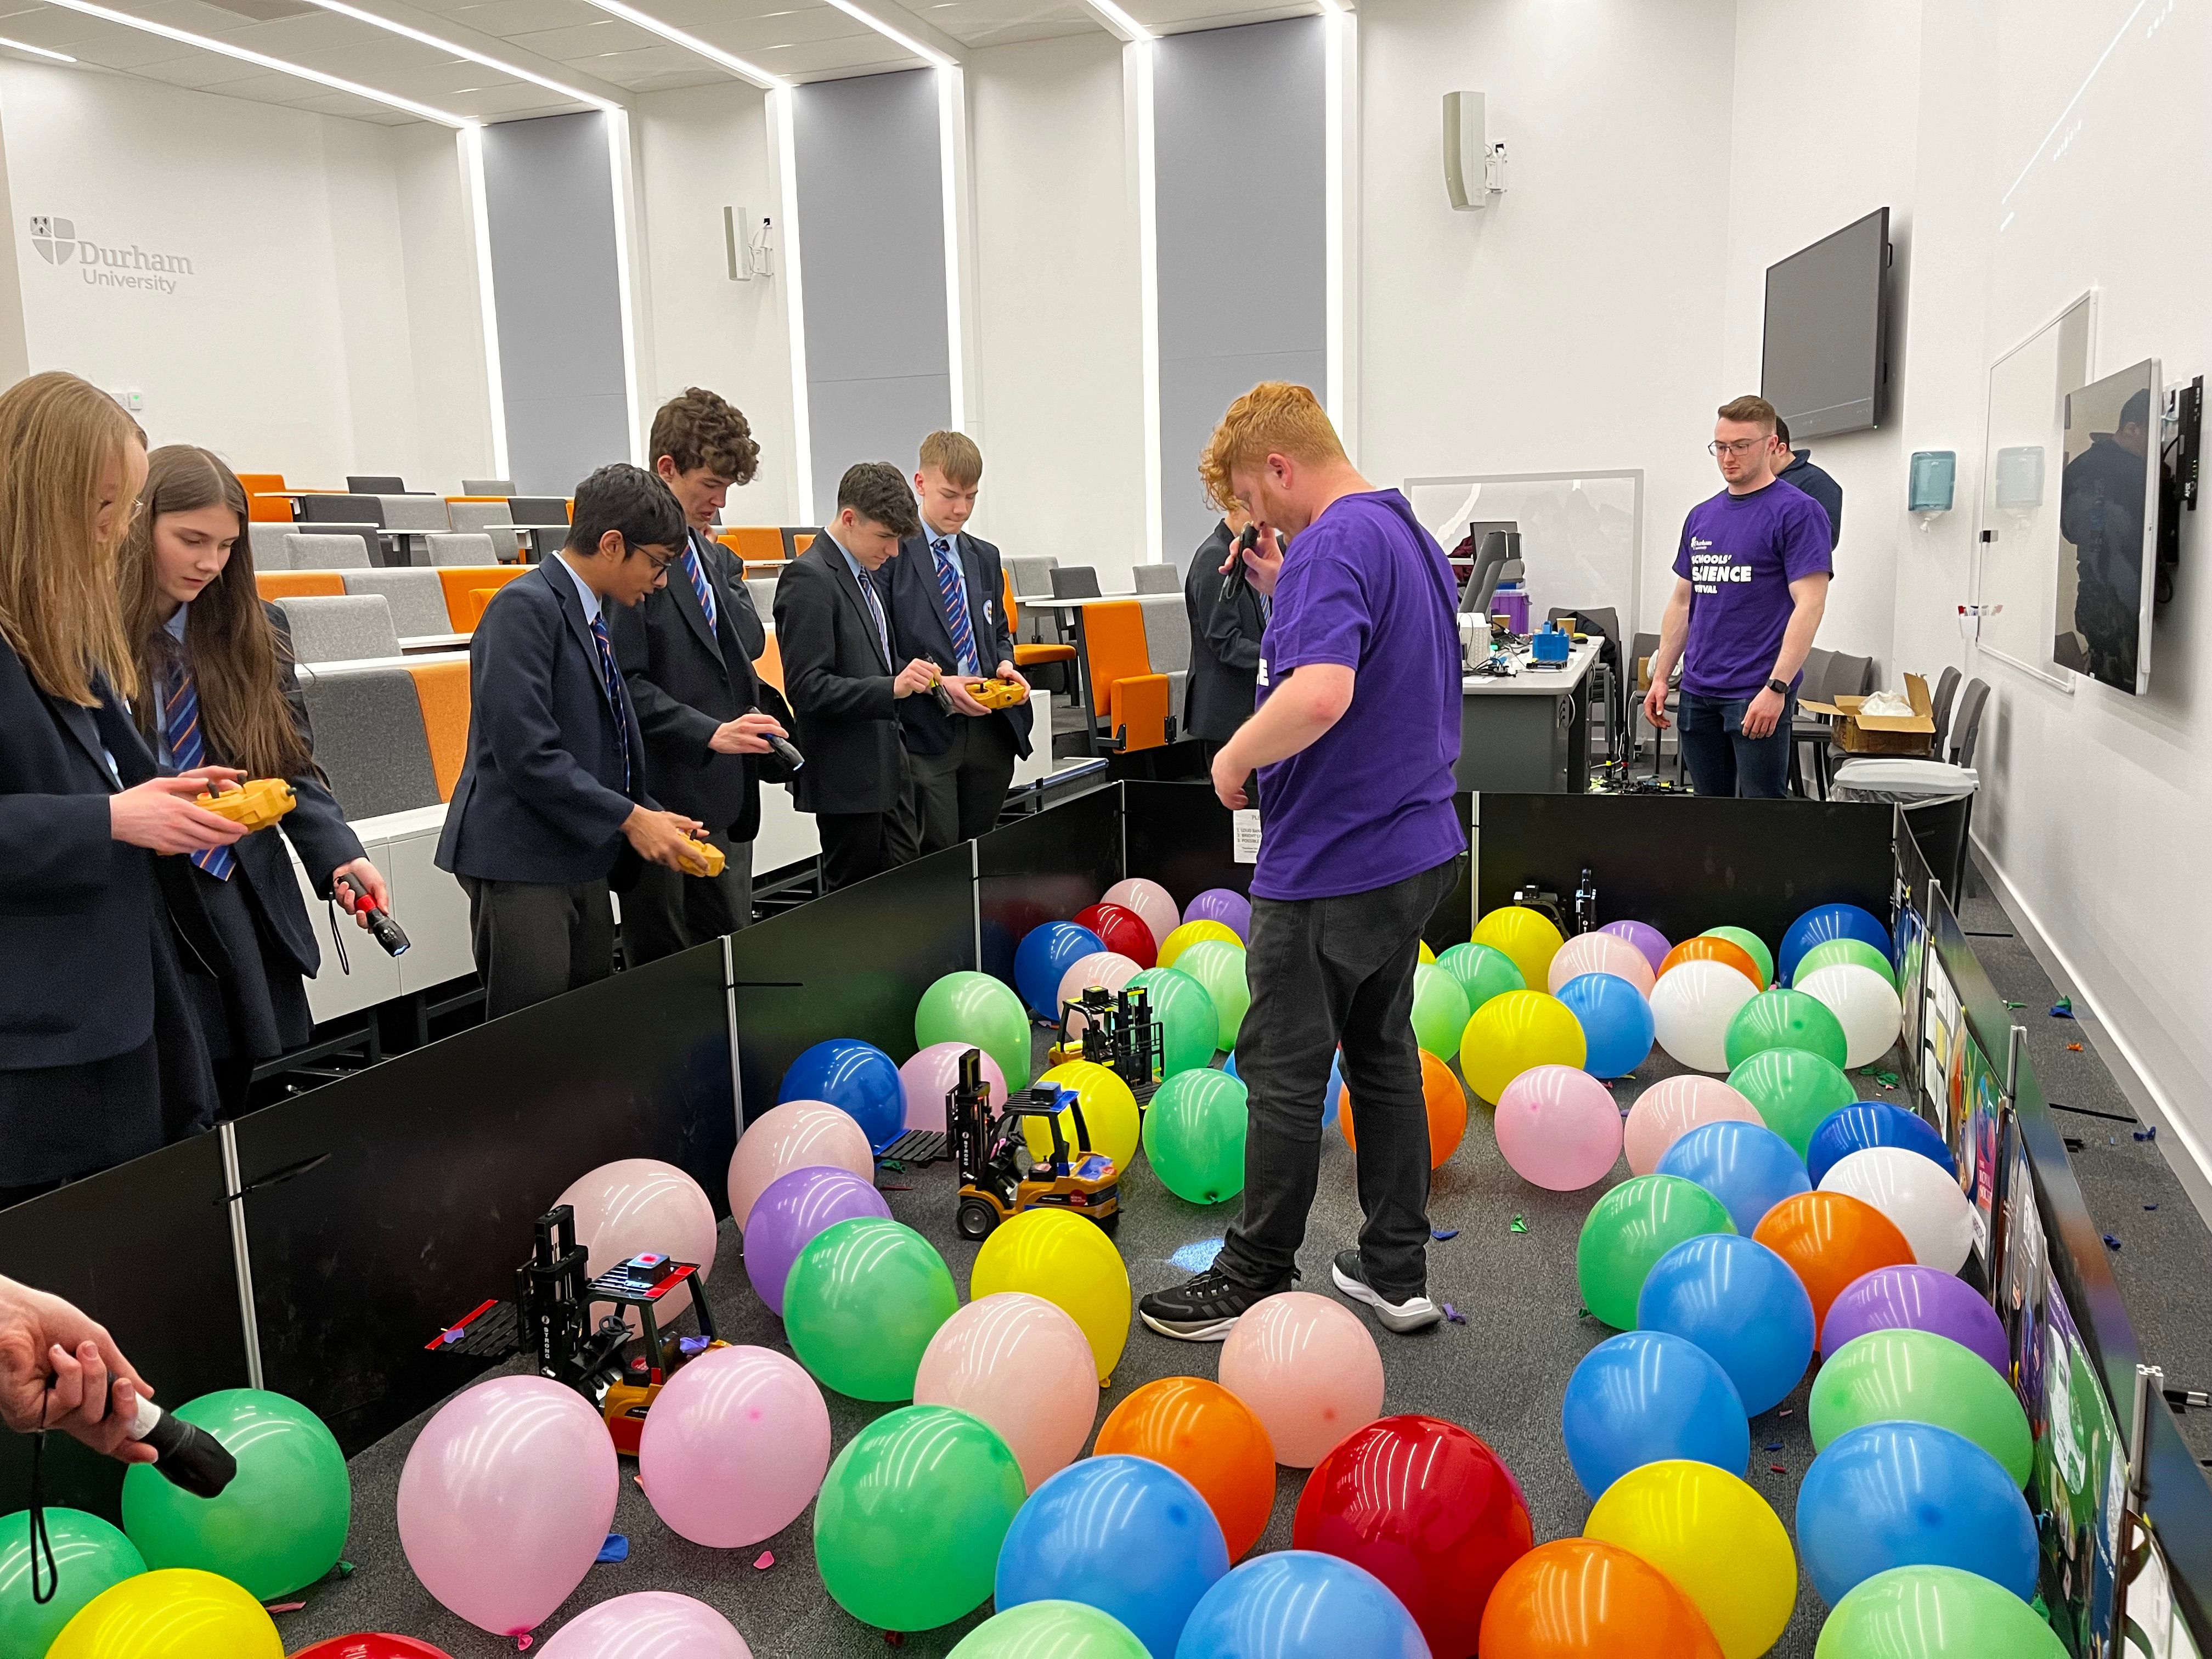 six teenage students in school uniform taking part in science experiment with a large number of multi-coloured balloons on floor